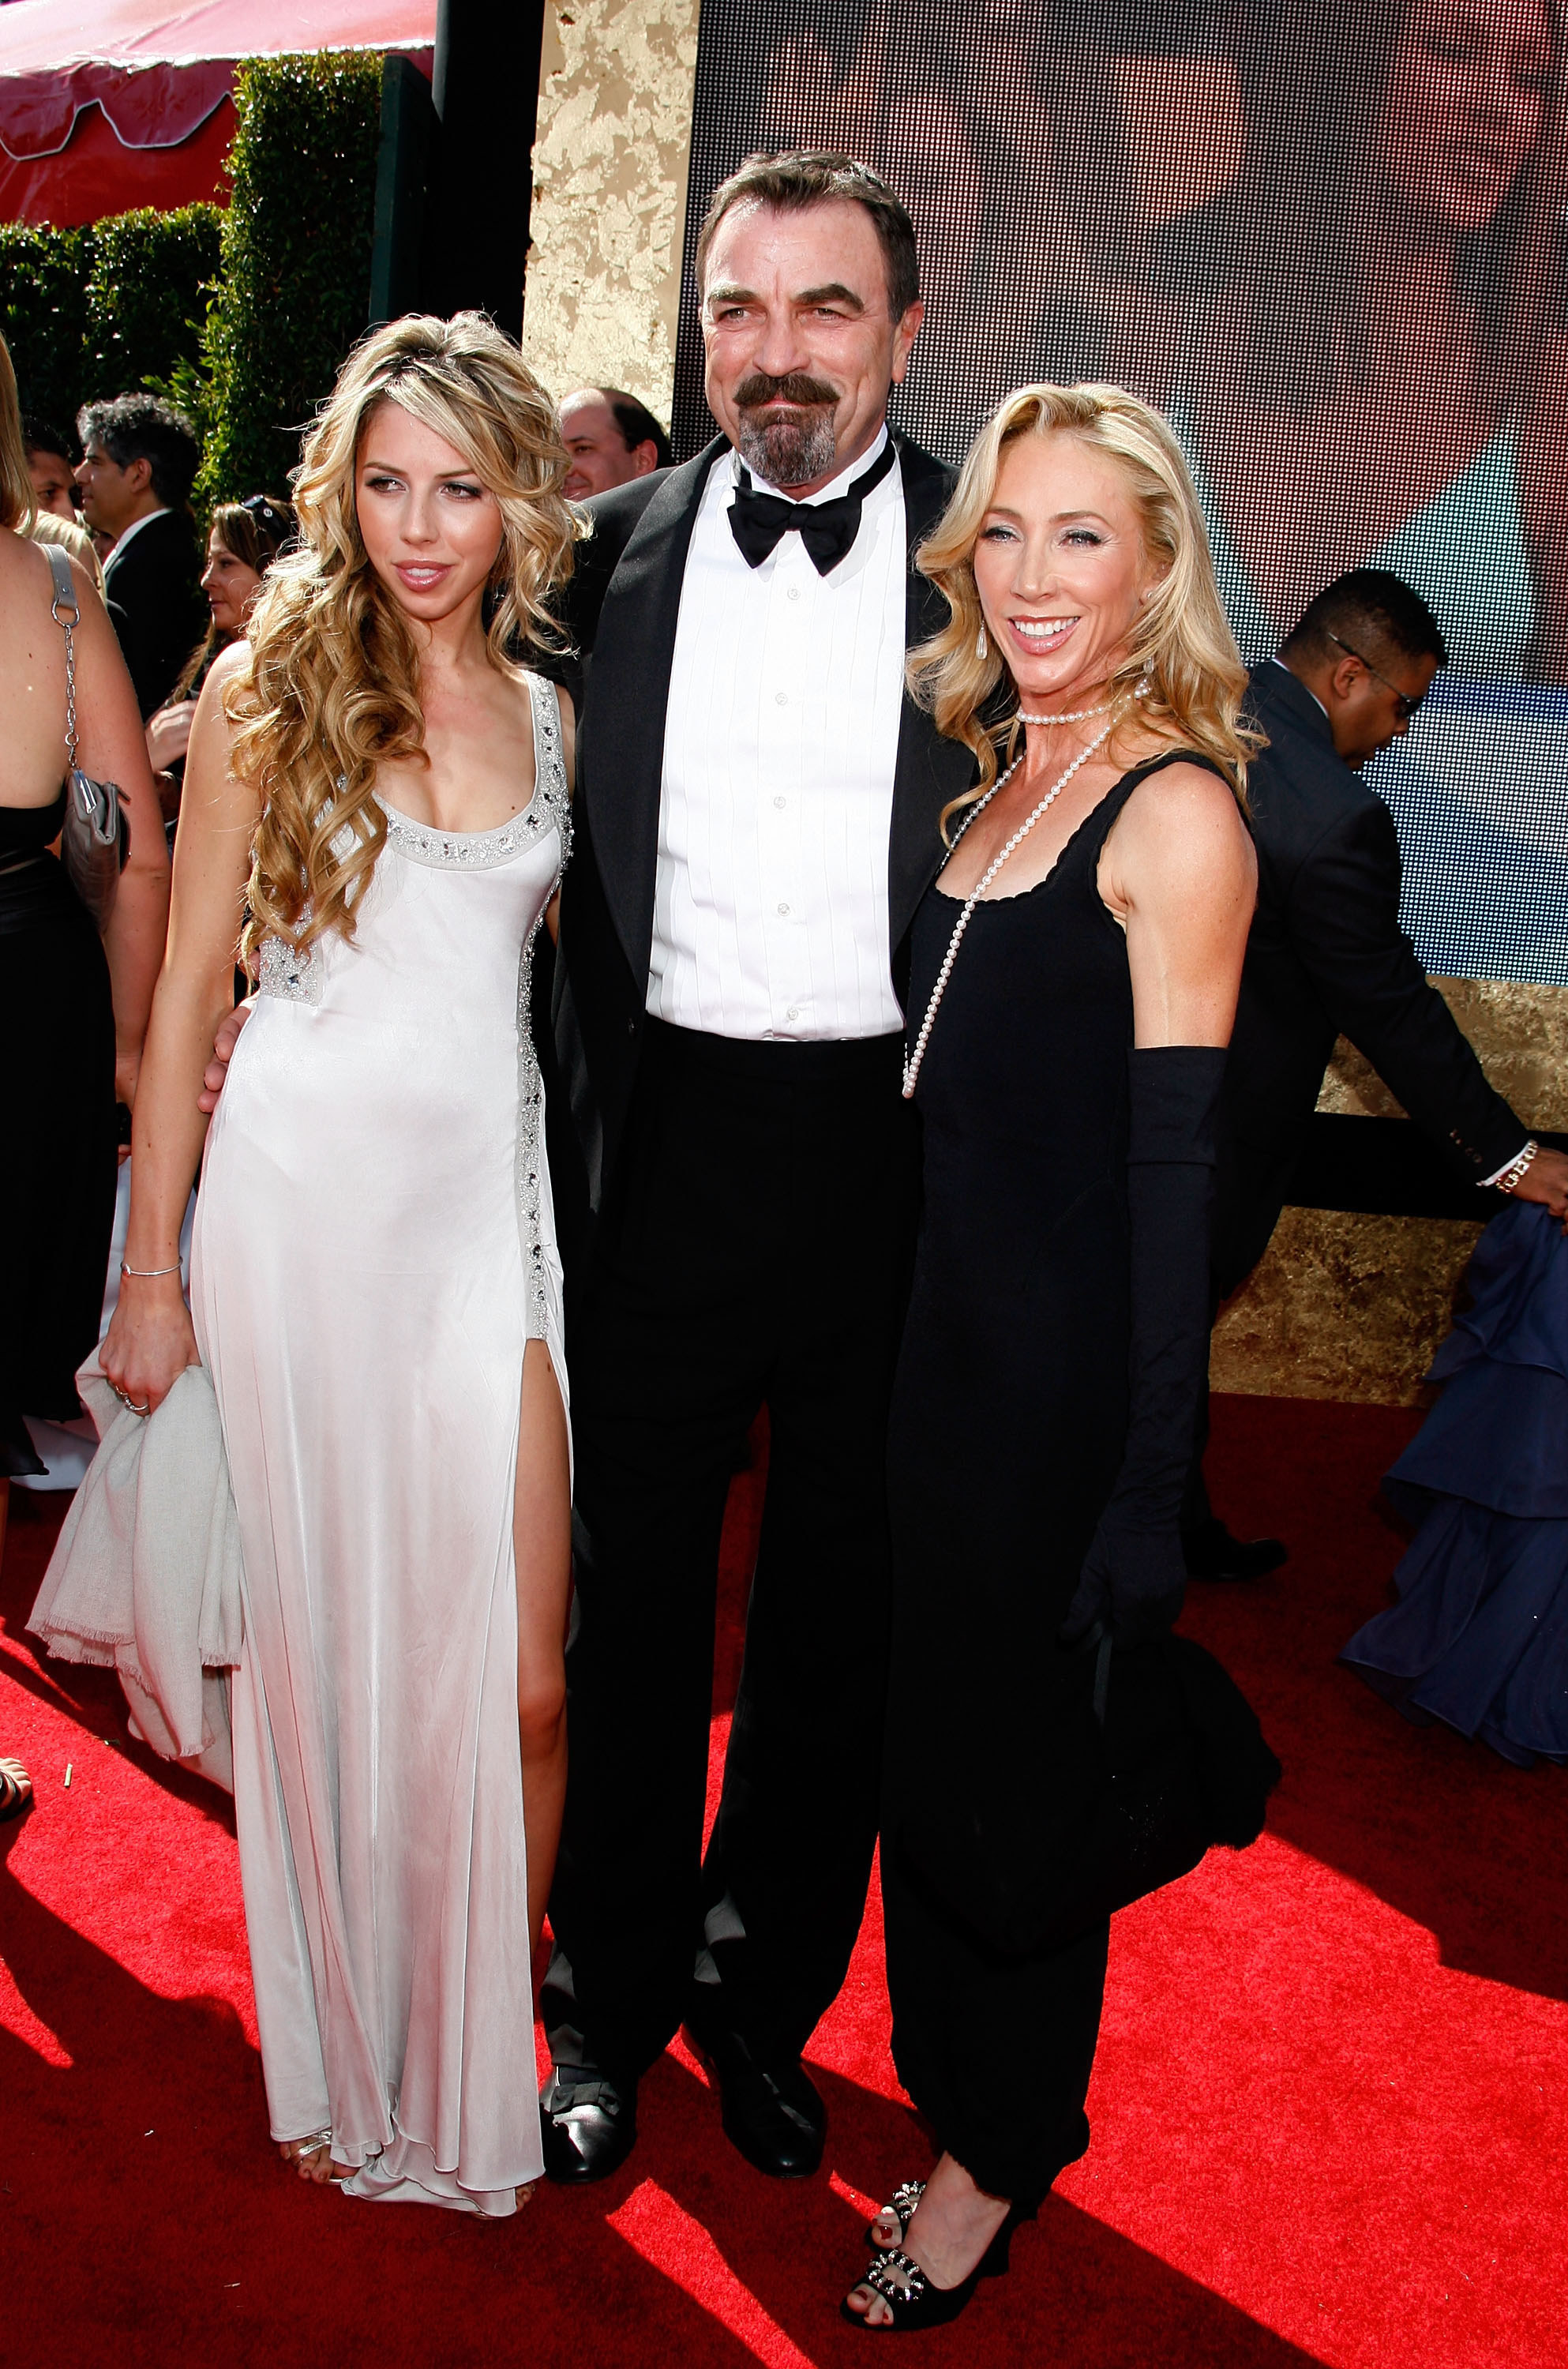 Actor Tom Selleck (C), wife Jillie (R), and daughter Hannah (L) arrive at the 59th Annual Primetime Emmy Awards at the Shrine Auditorium on September 16, 2007 in Los Angeles, California